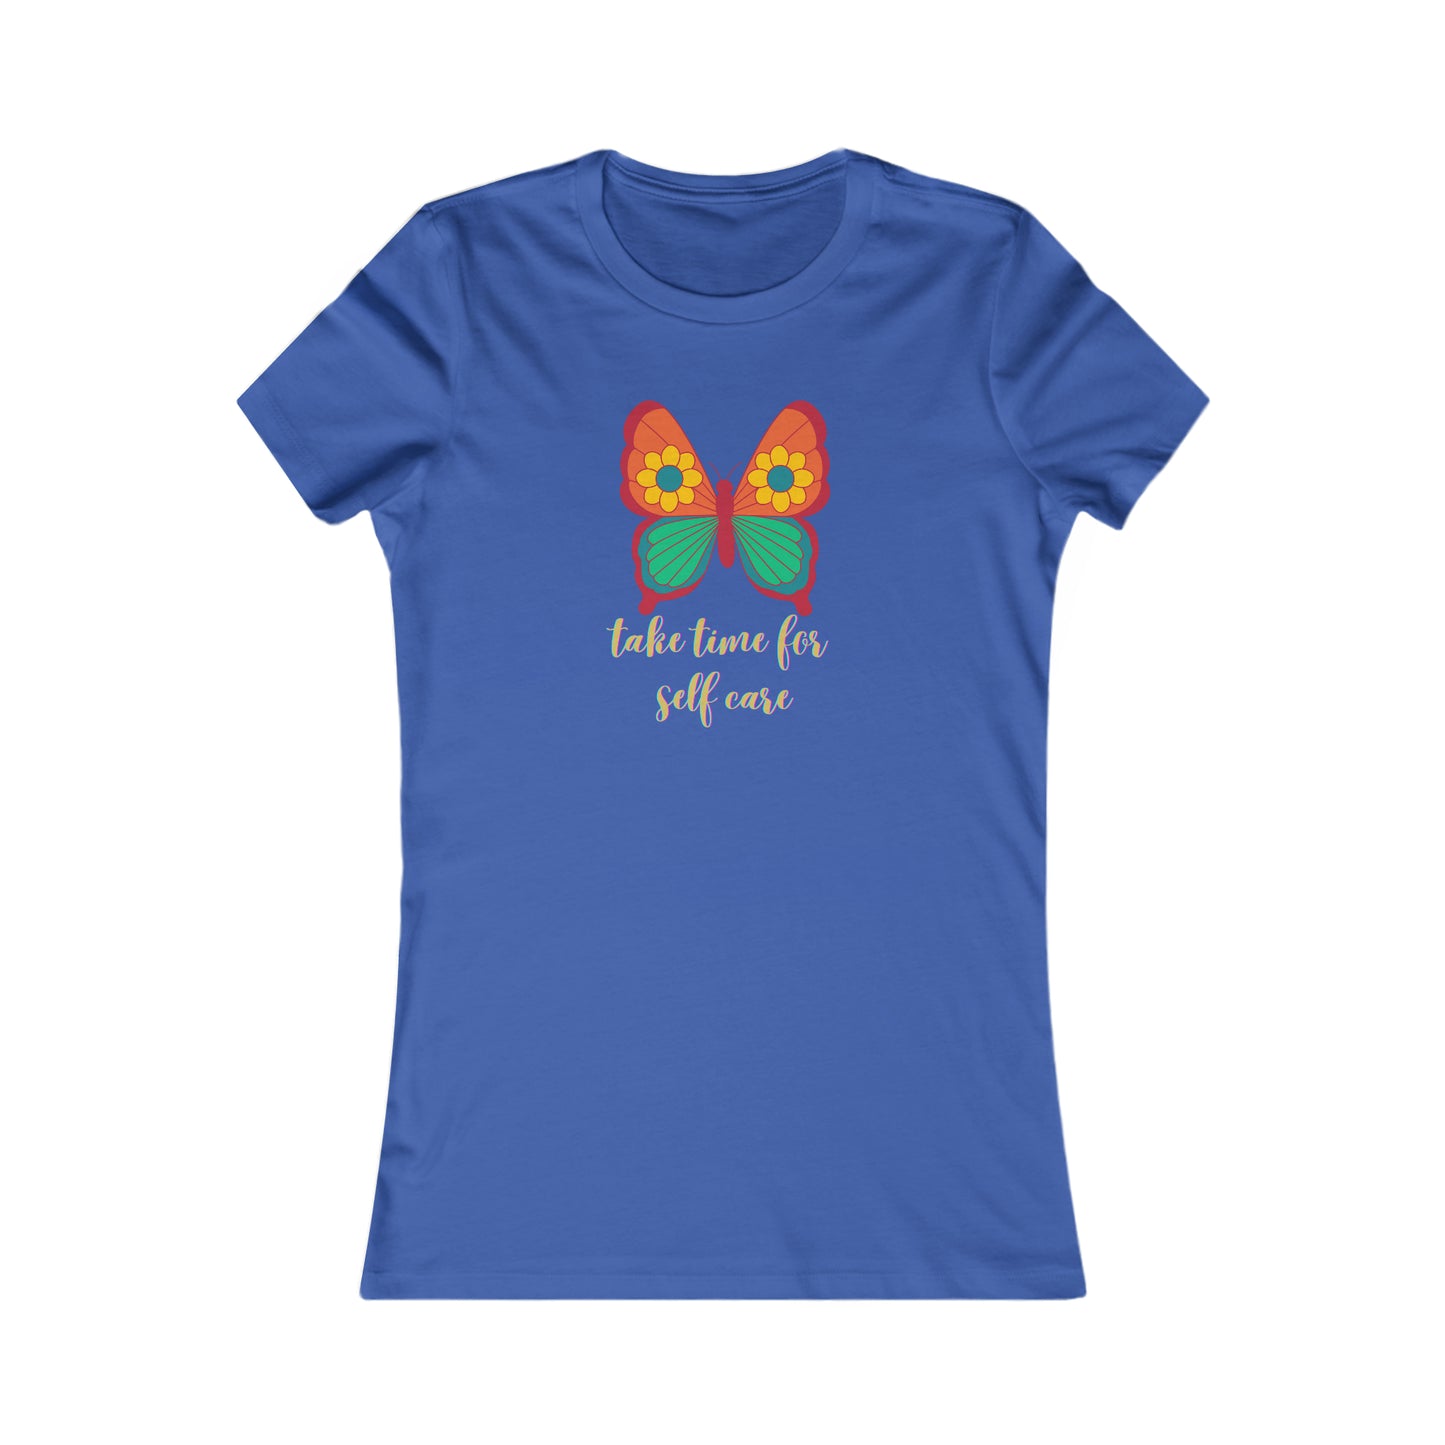 Go ahead and “take time for self care” message on this Women's Favorite Tee design. We all need it for health and wellness. Slim fit so please check the size table.